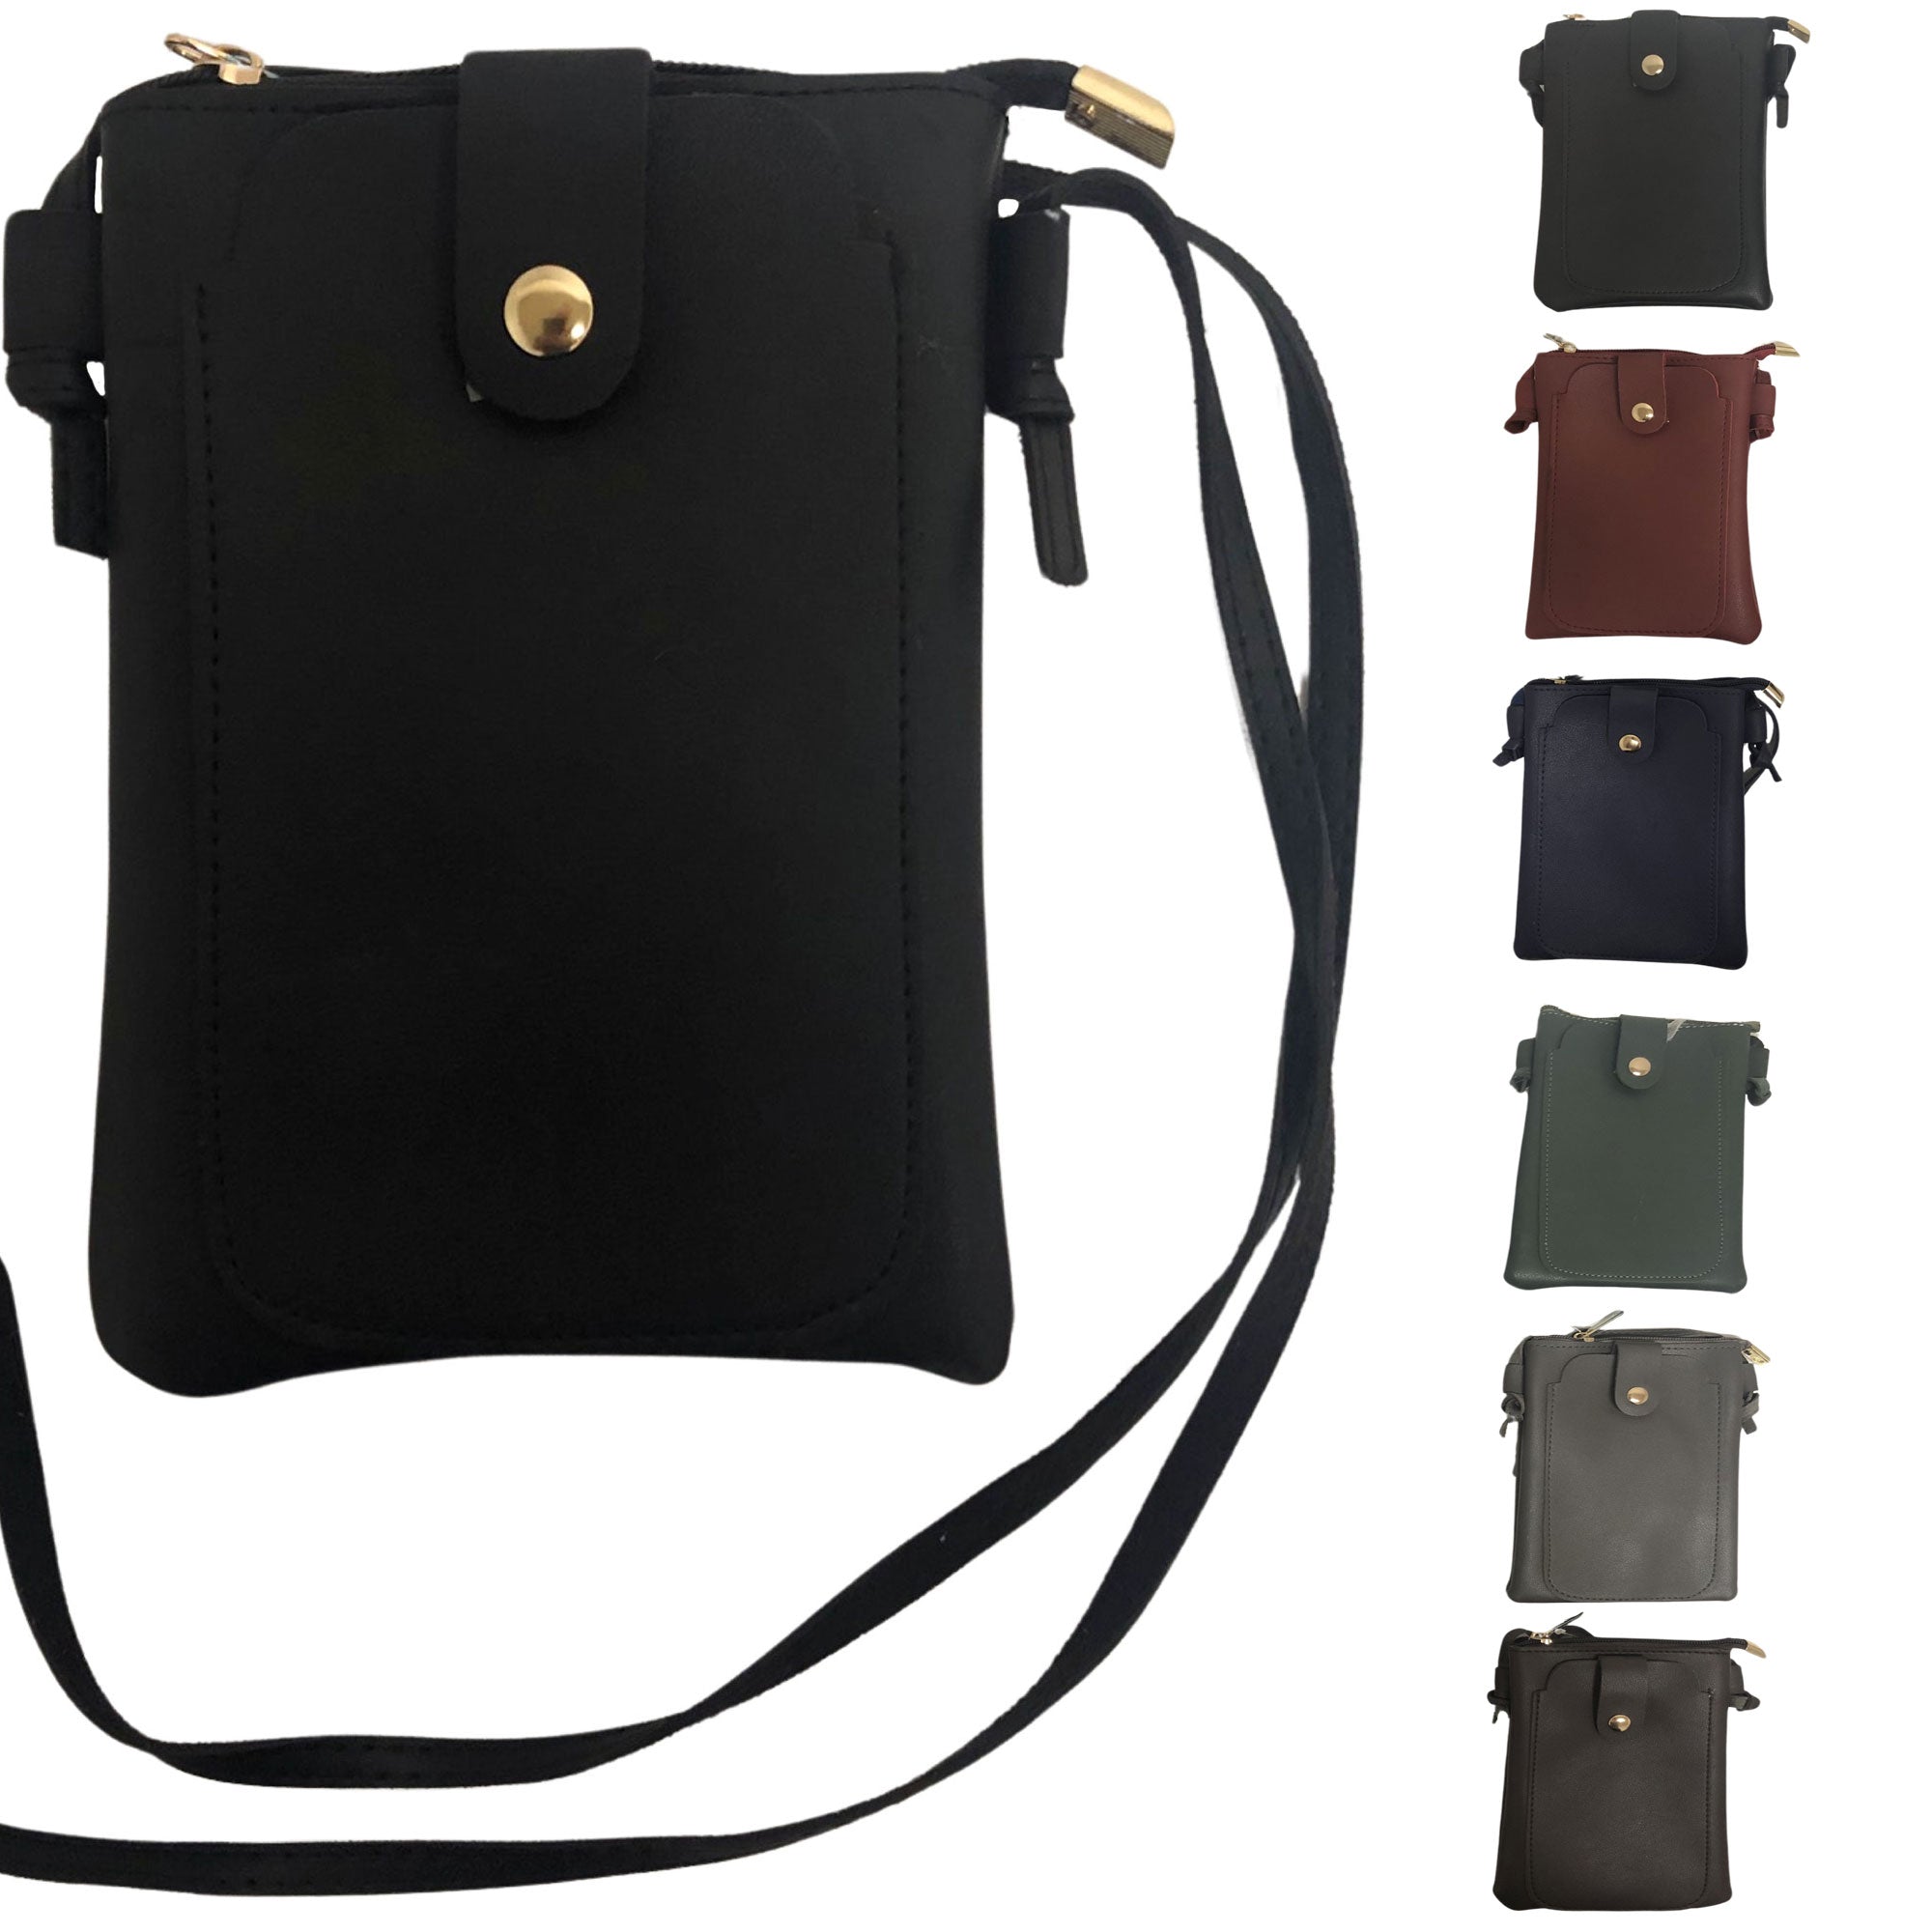 CLEARANCE CROSSBODY BAG FOR WOMEN (CASE OF 48 - $1.75 / PIECE)  Wholesale Crossbody Phone Bag in Assorted Colors SKU: M192-DK-48